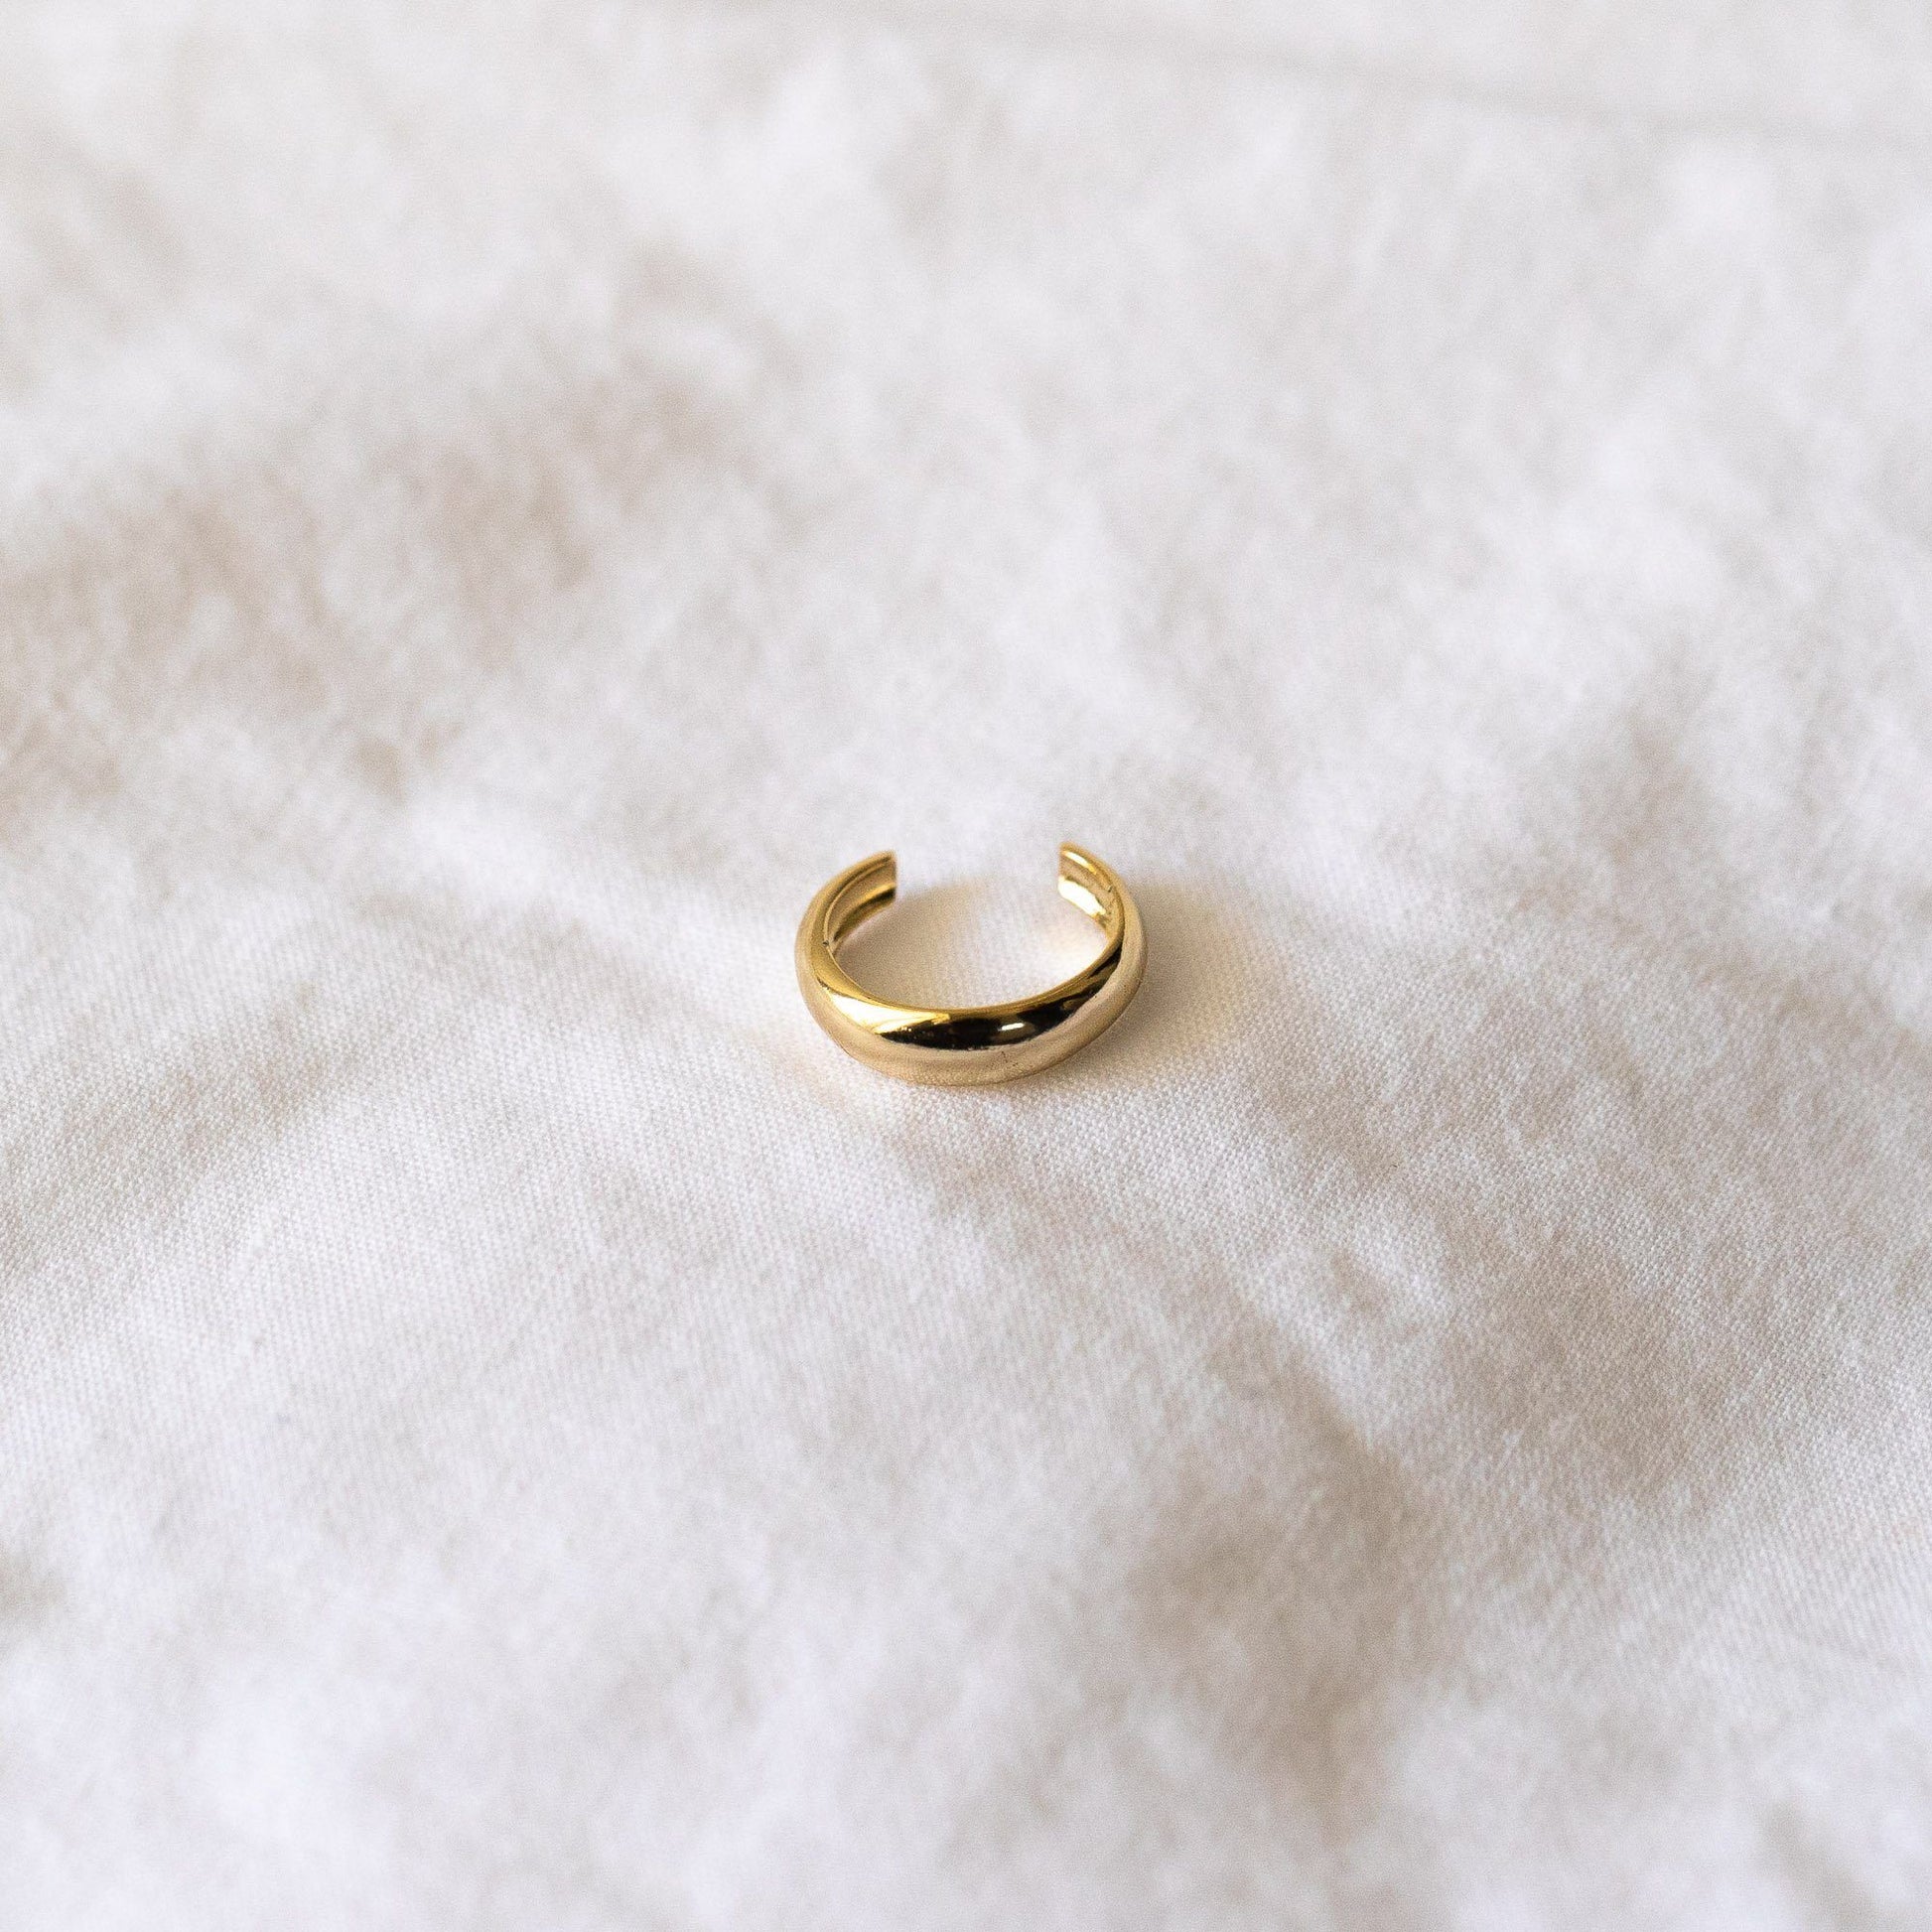 Flatlay of 3mm gold plated, sterling silver ear cuff to wear on conch. Sitting on top of plain, white sheet.